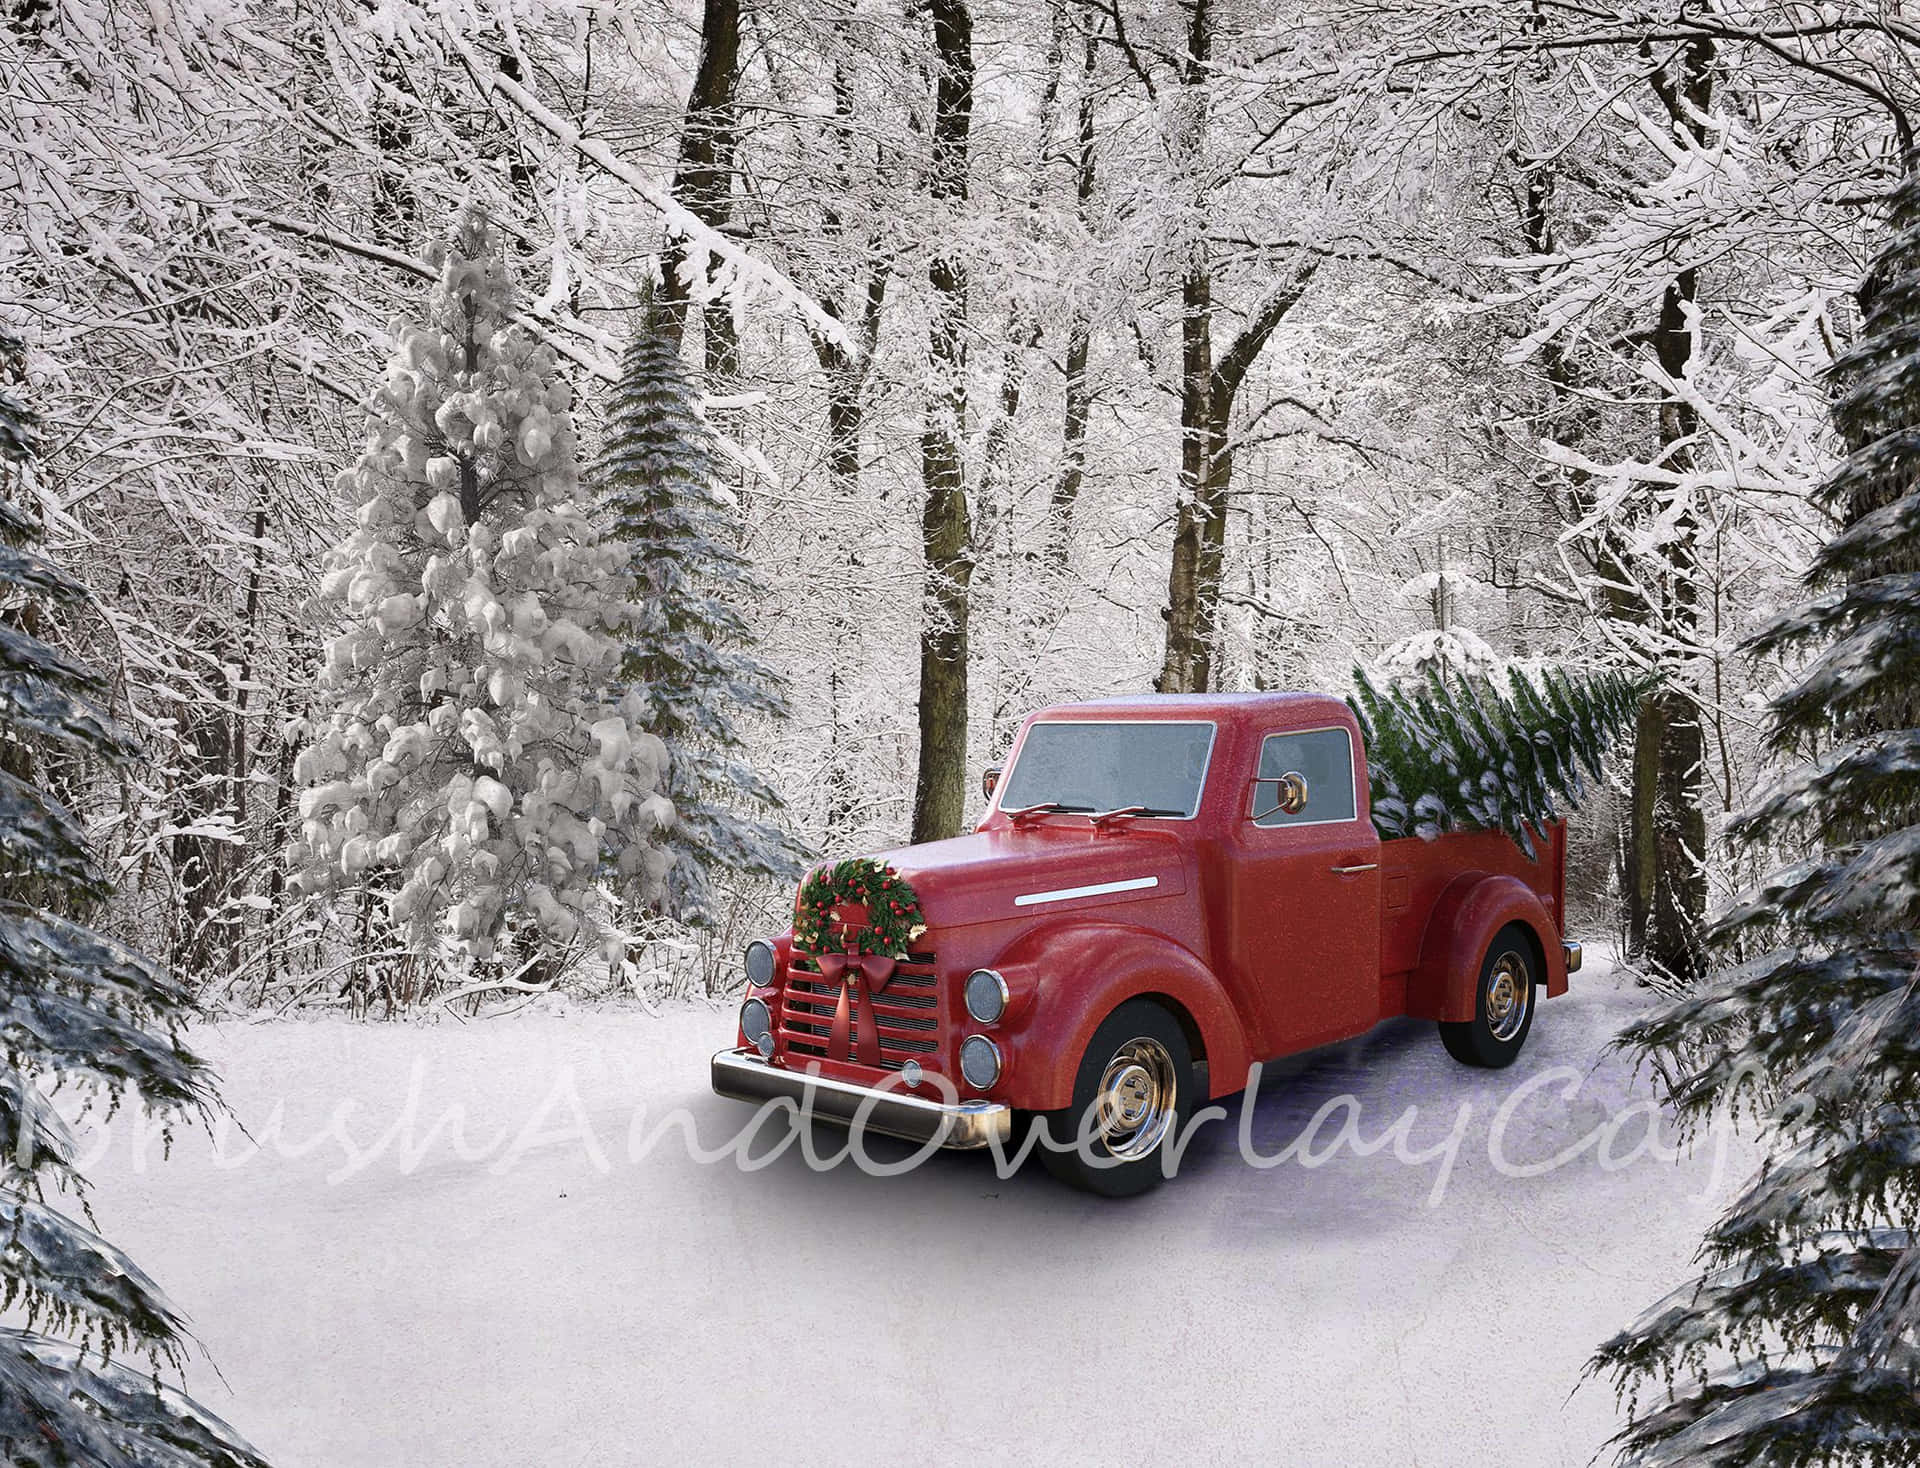 A vintage truck during Christmas time. Wallpaper